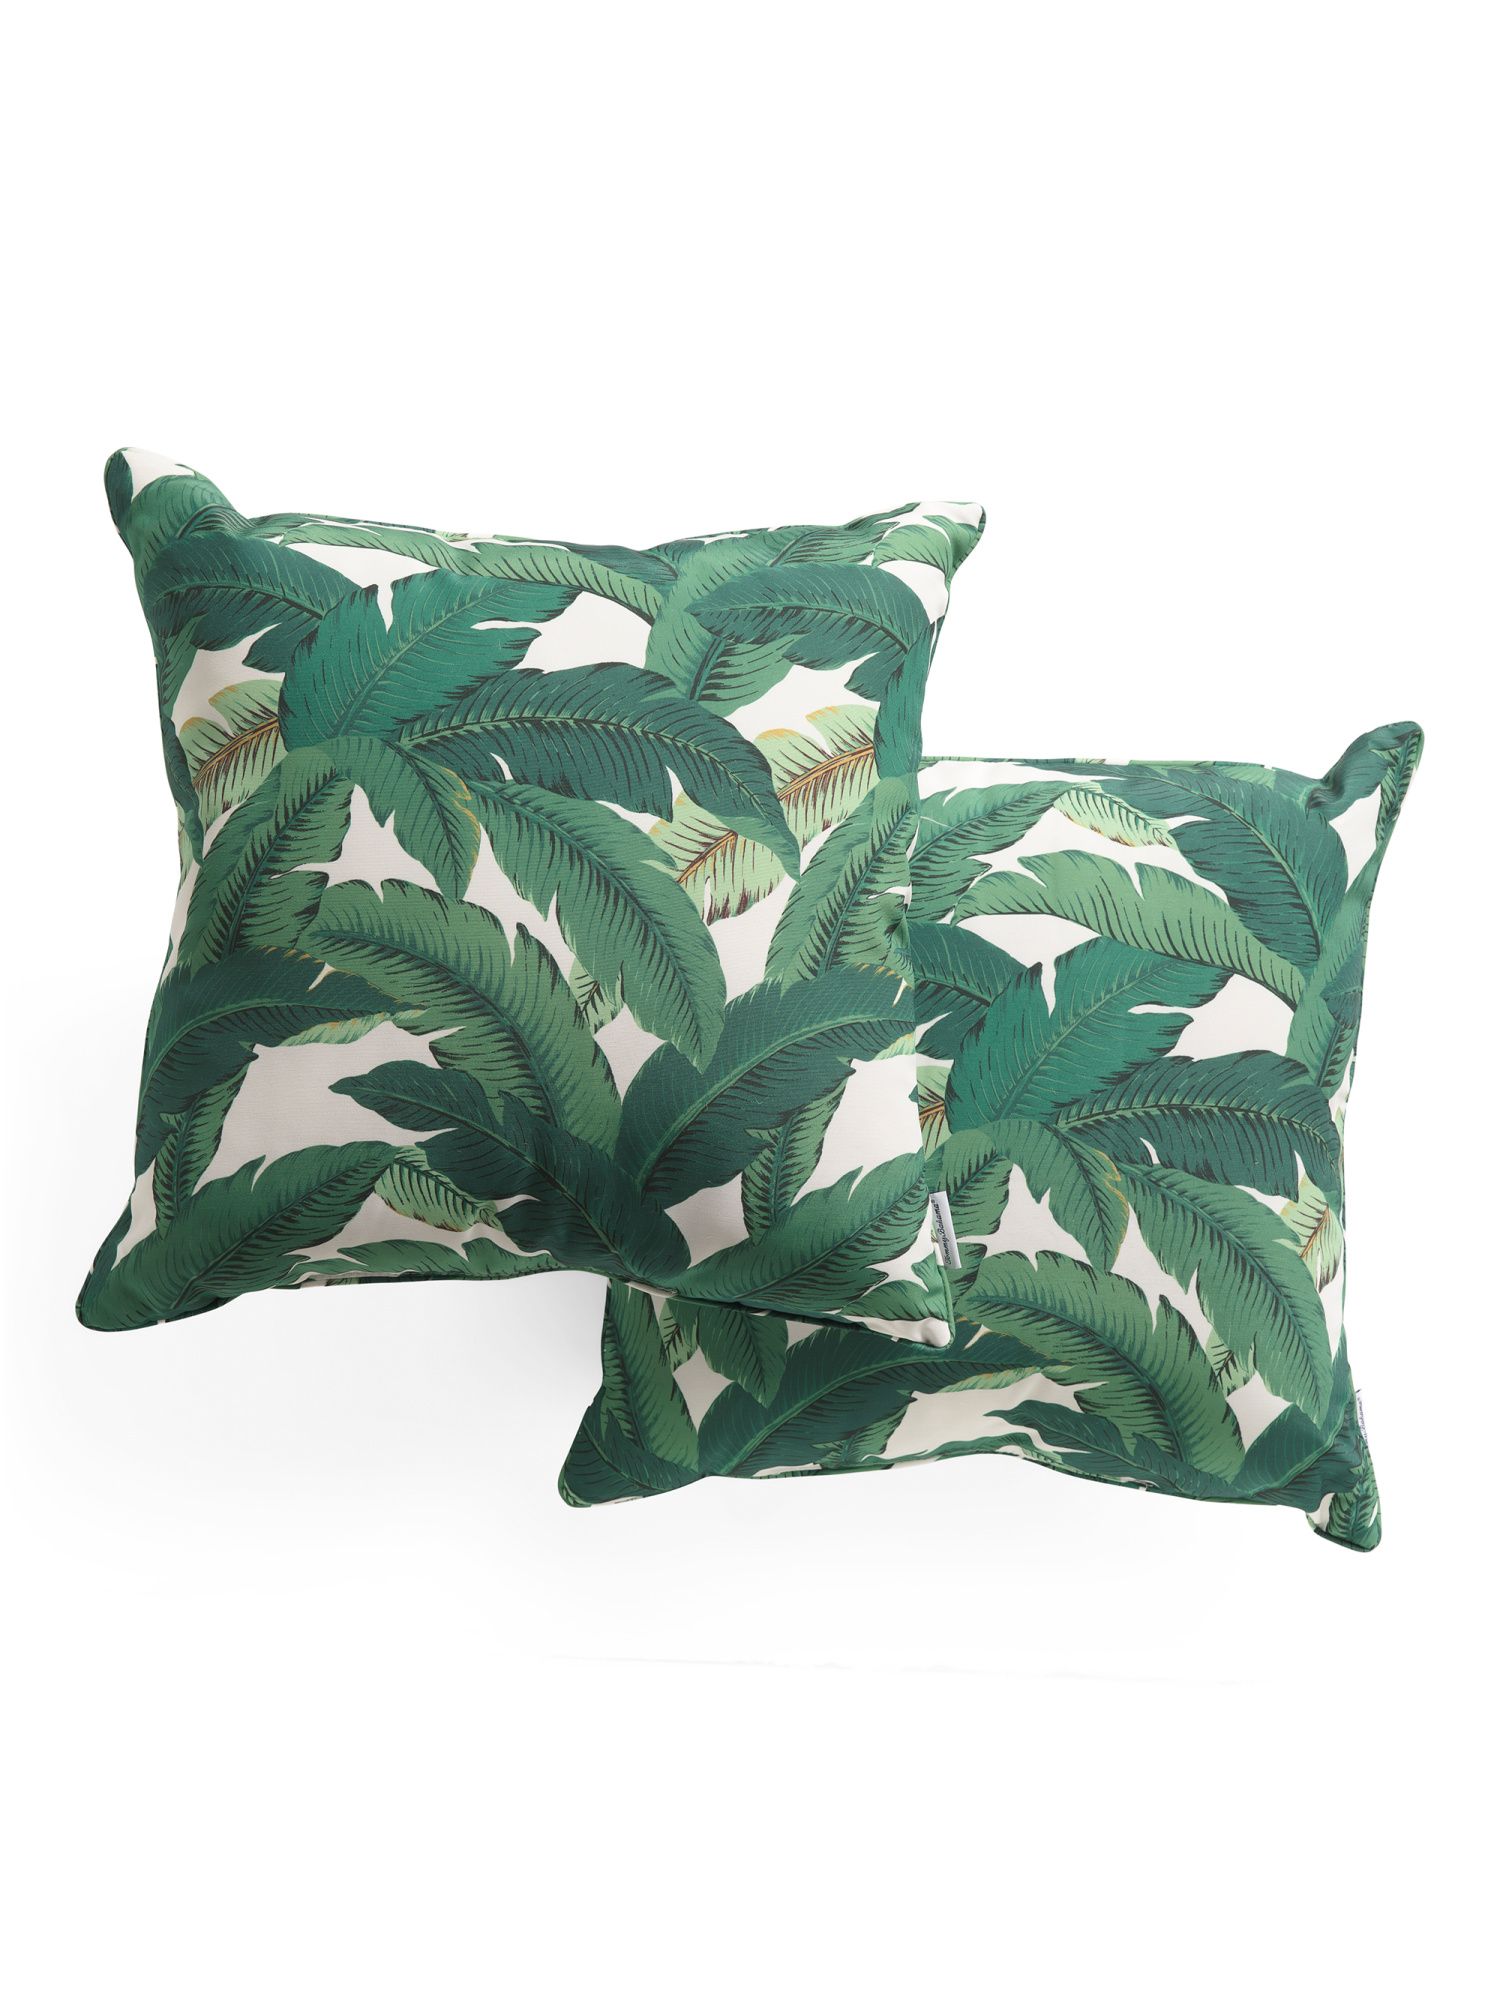 2pc 20x20 Outdoor Swaying Palm Pillows | TJ Maxx